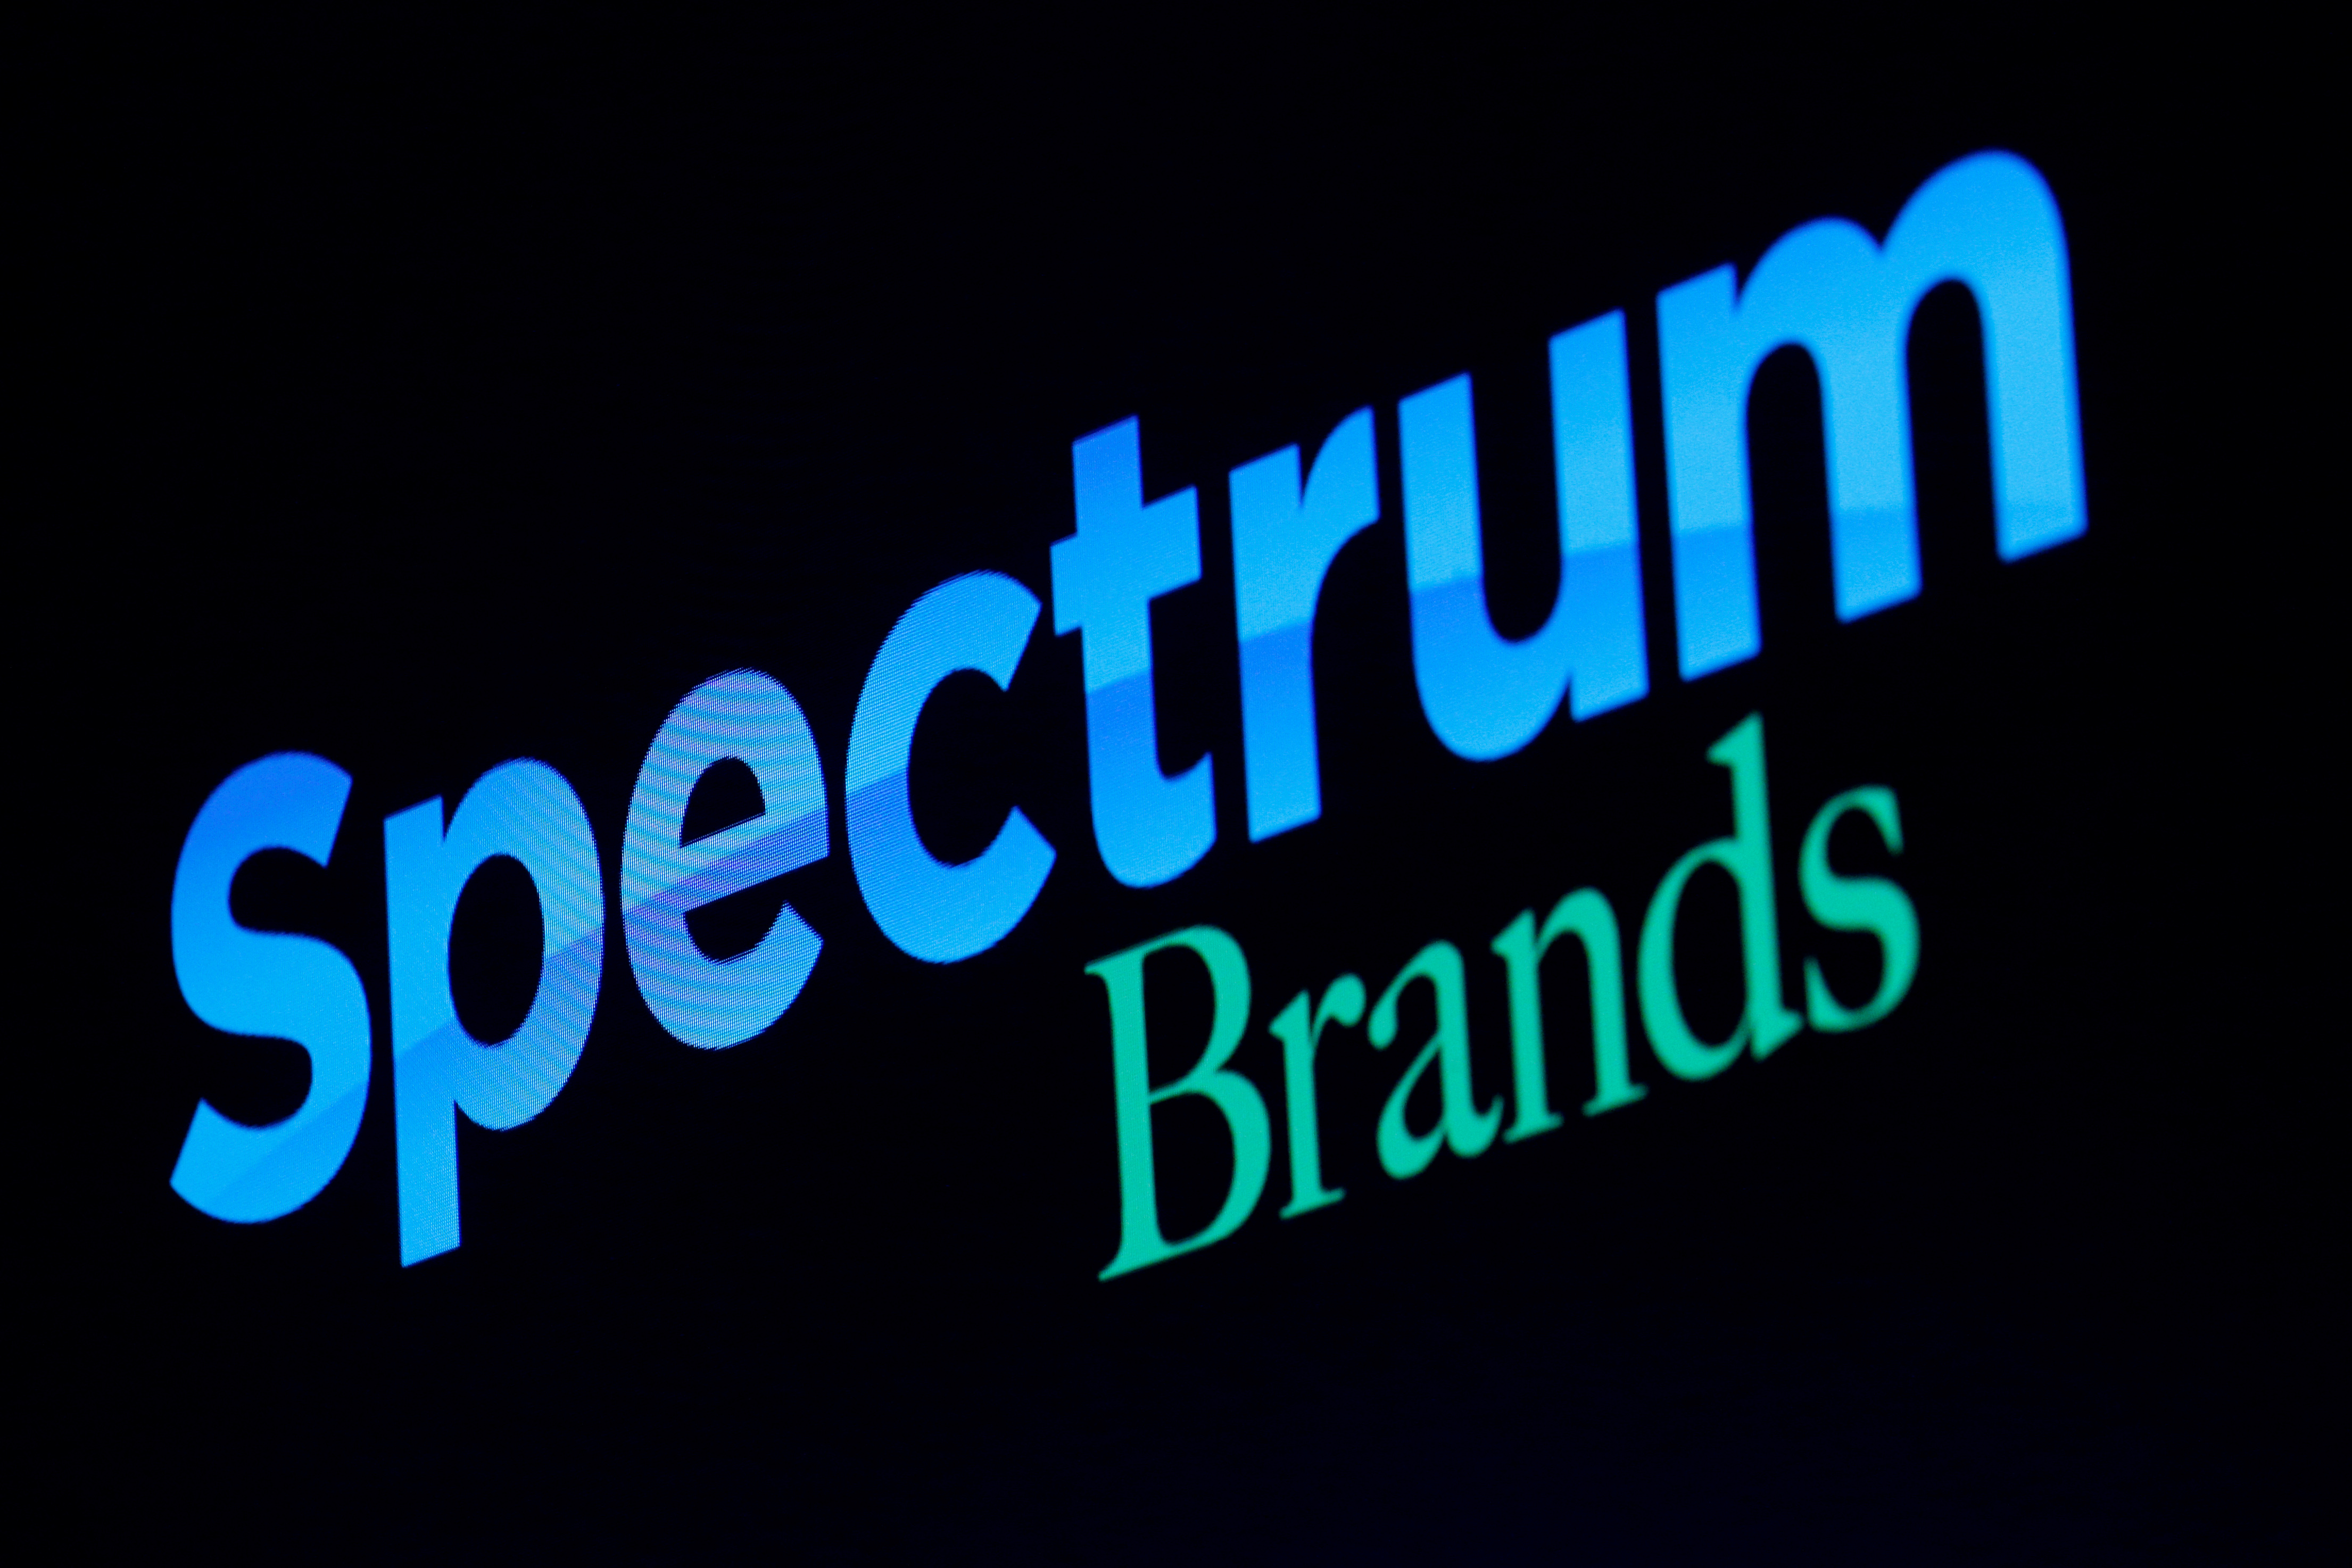 The logo for Spectrum Brands Holdings, Inc., is displayed screen on the floor of the NYSE in New York